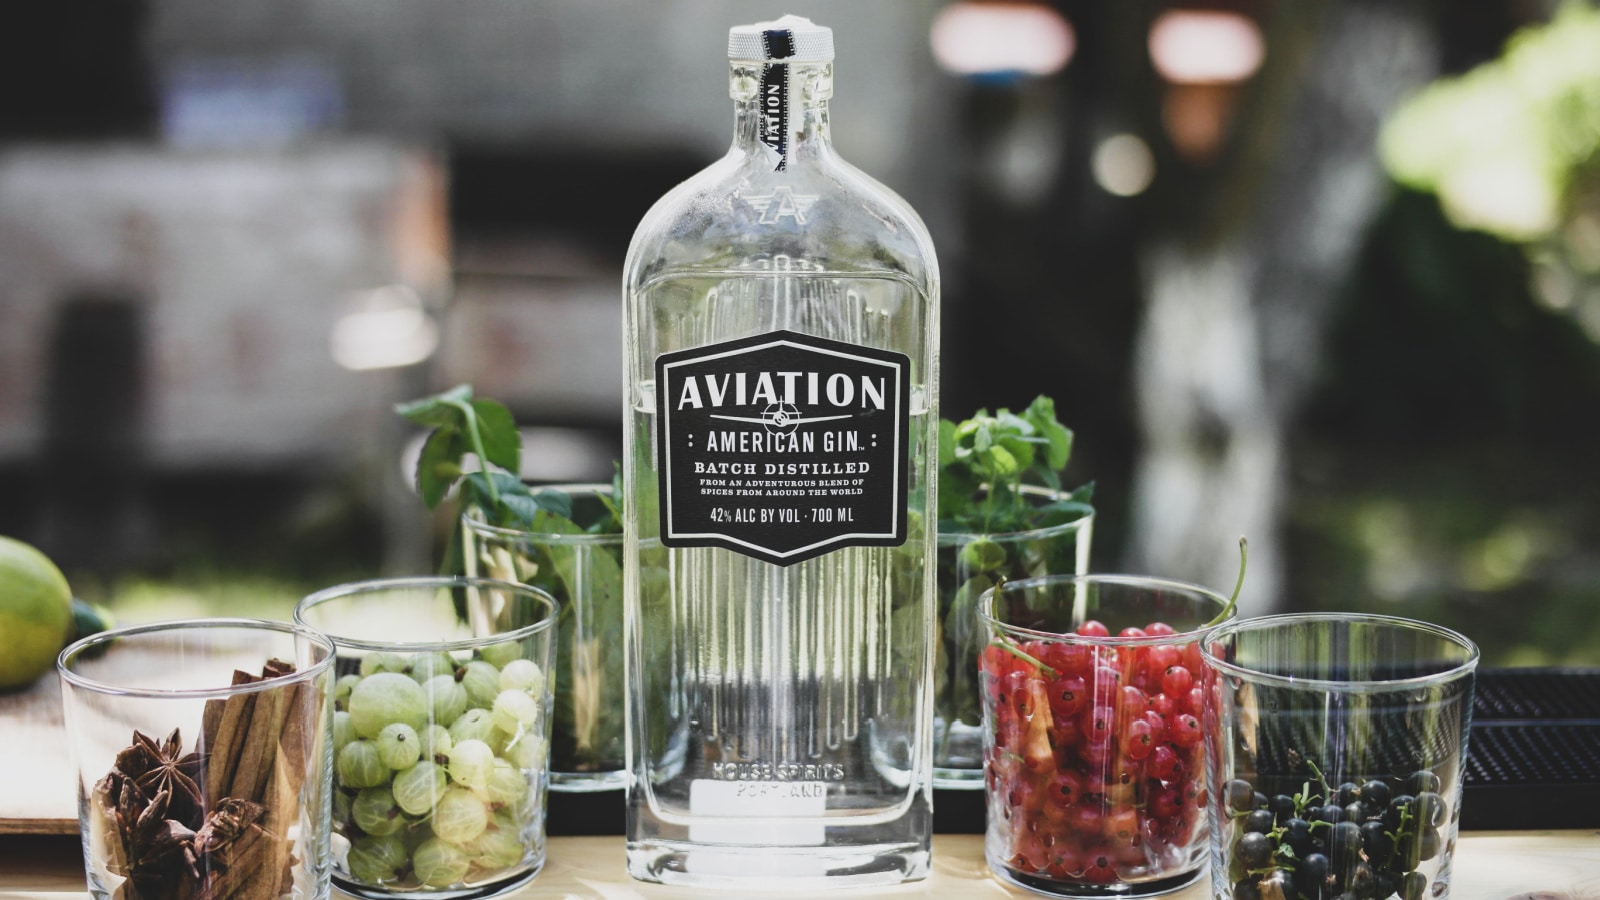 26/03/2020 Portland Oregon, Aviation Gin, owned by Celebrity Ryan Reynolds Best gin in the world American Company owned by a Canadian Gin and tonic and garnishes